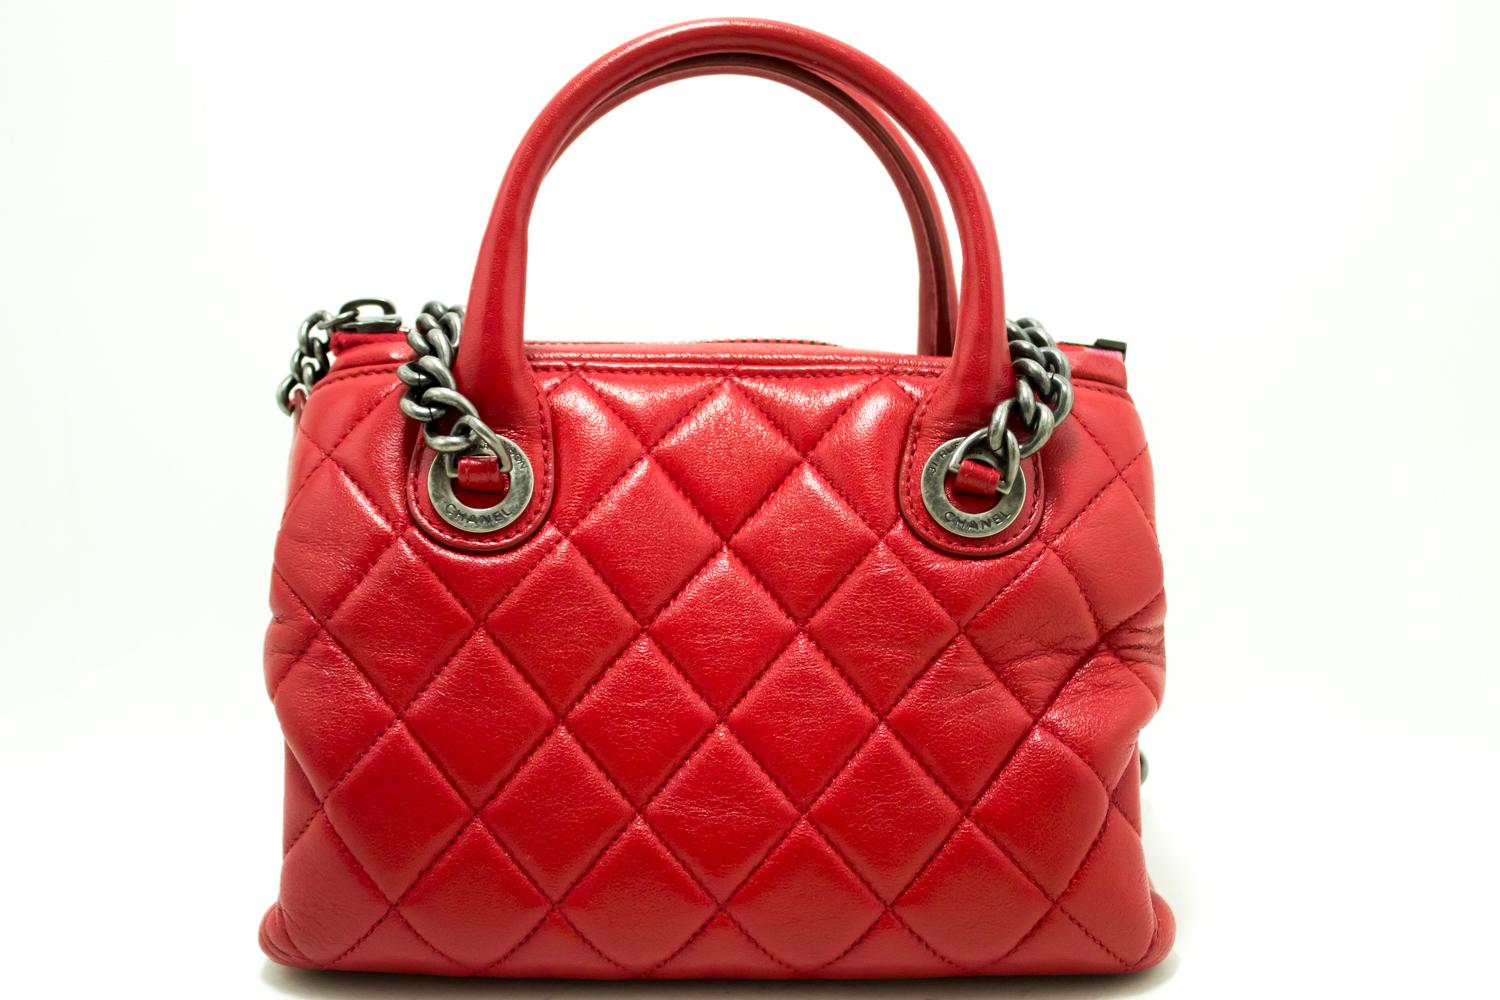 An authentic CHANEL 2 Way Red Silver Chain Shoulder Bag Handbag Quilted Calf. The color is Red. The outside material is Leather. The pattern is Solid.
Conditions & Ratings
Outside material: Calfskin
Color: Red
Closure: Zipper
Hardware and chain: